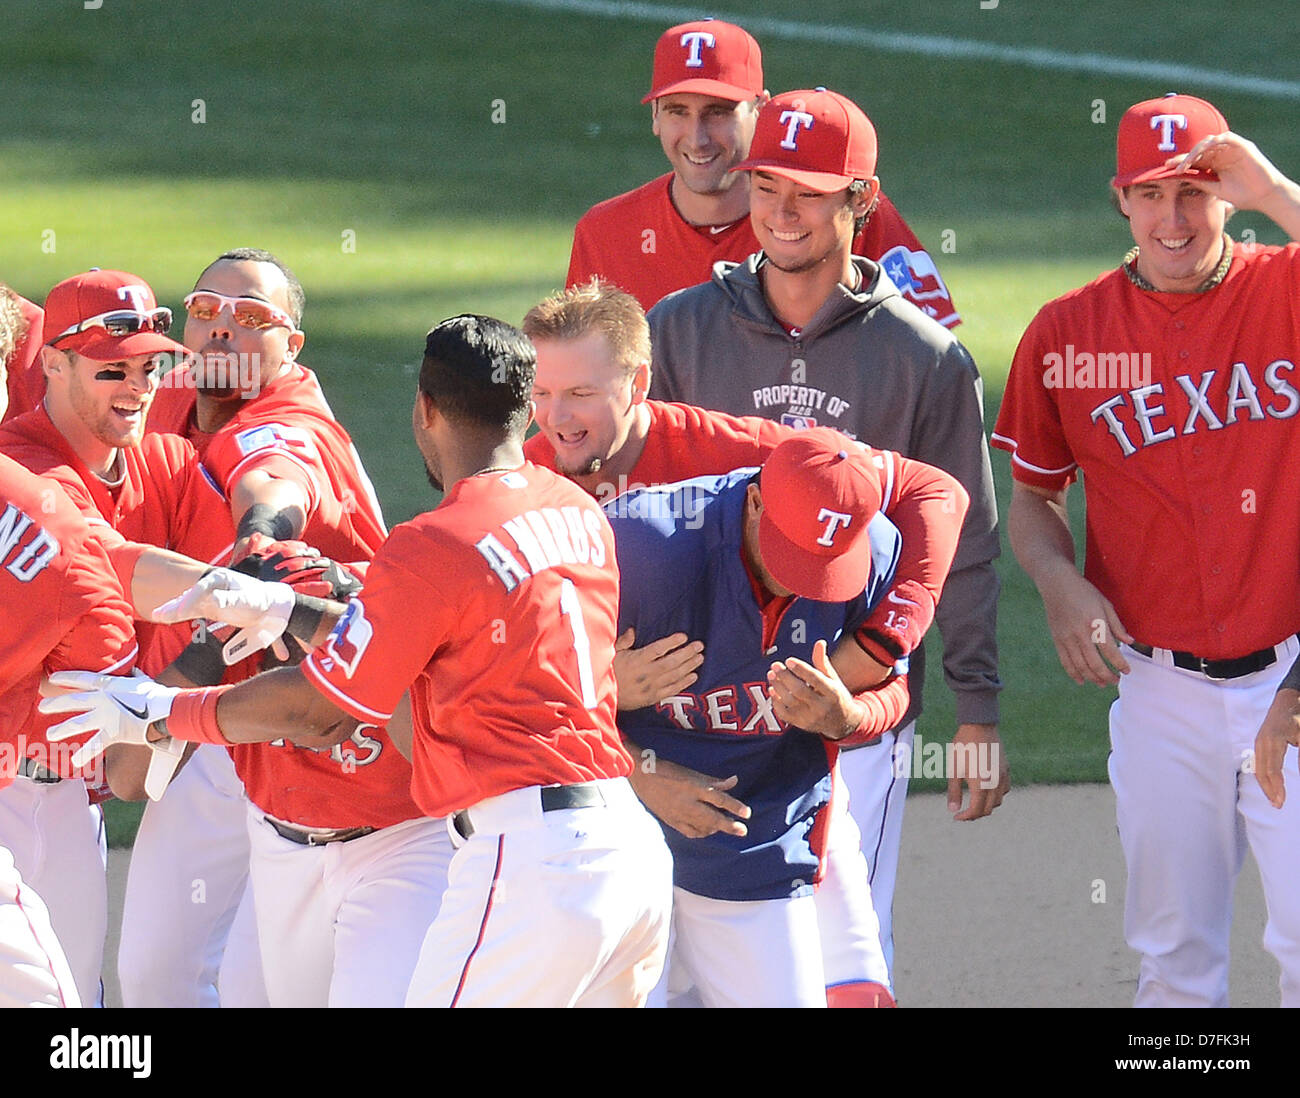 Arlington, Texas, USA. 5th May 2013. Texas Rangers team group, MAY 5, 2013 - MLB : Adrian Beltre of the Texas Rangers celebrates with his teammates including Yu Darvish after hitting a walk off single in the ninth inning during the baseball game against the Boston Red Sox at Rangers Ballpark in Arlington in Arlington, Texas, United States. (Photo by AFLO/Alamy Live News) Stock Photo